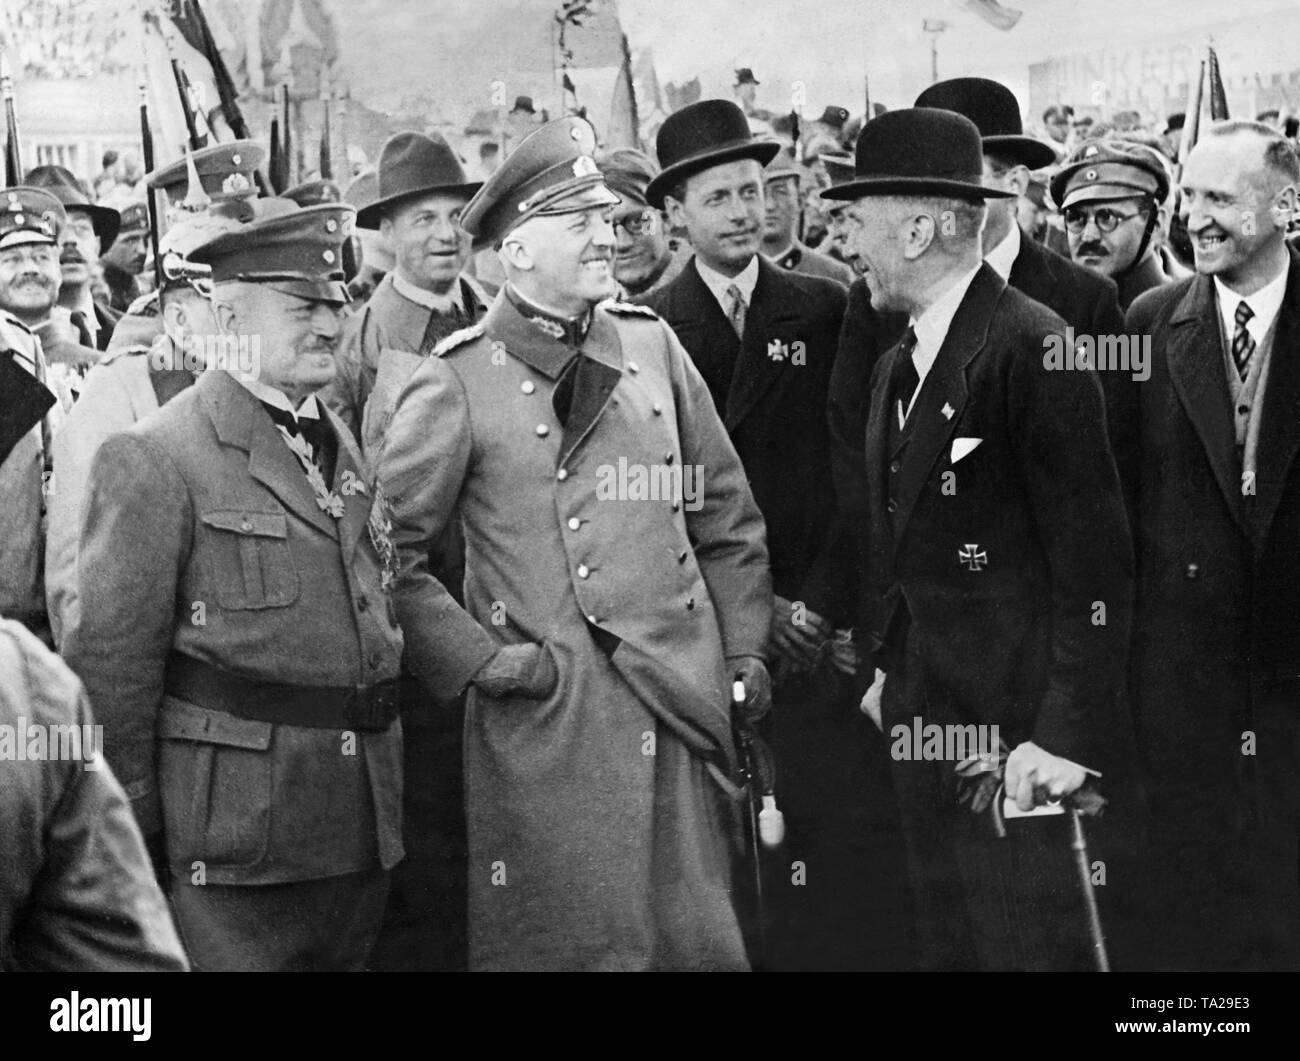 The image shows Chancellor Franz von Papen (right), who had to resign on 17 November 1932 and his successor General Kurt von Schleicher (left), who was Chancellor for a short period between December 2 1932 and 28 January 1933, on the racecourse in Berlin. Stock Photo